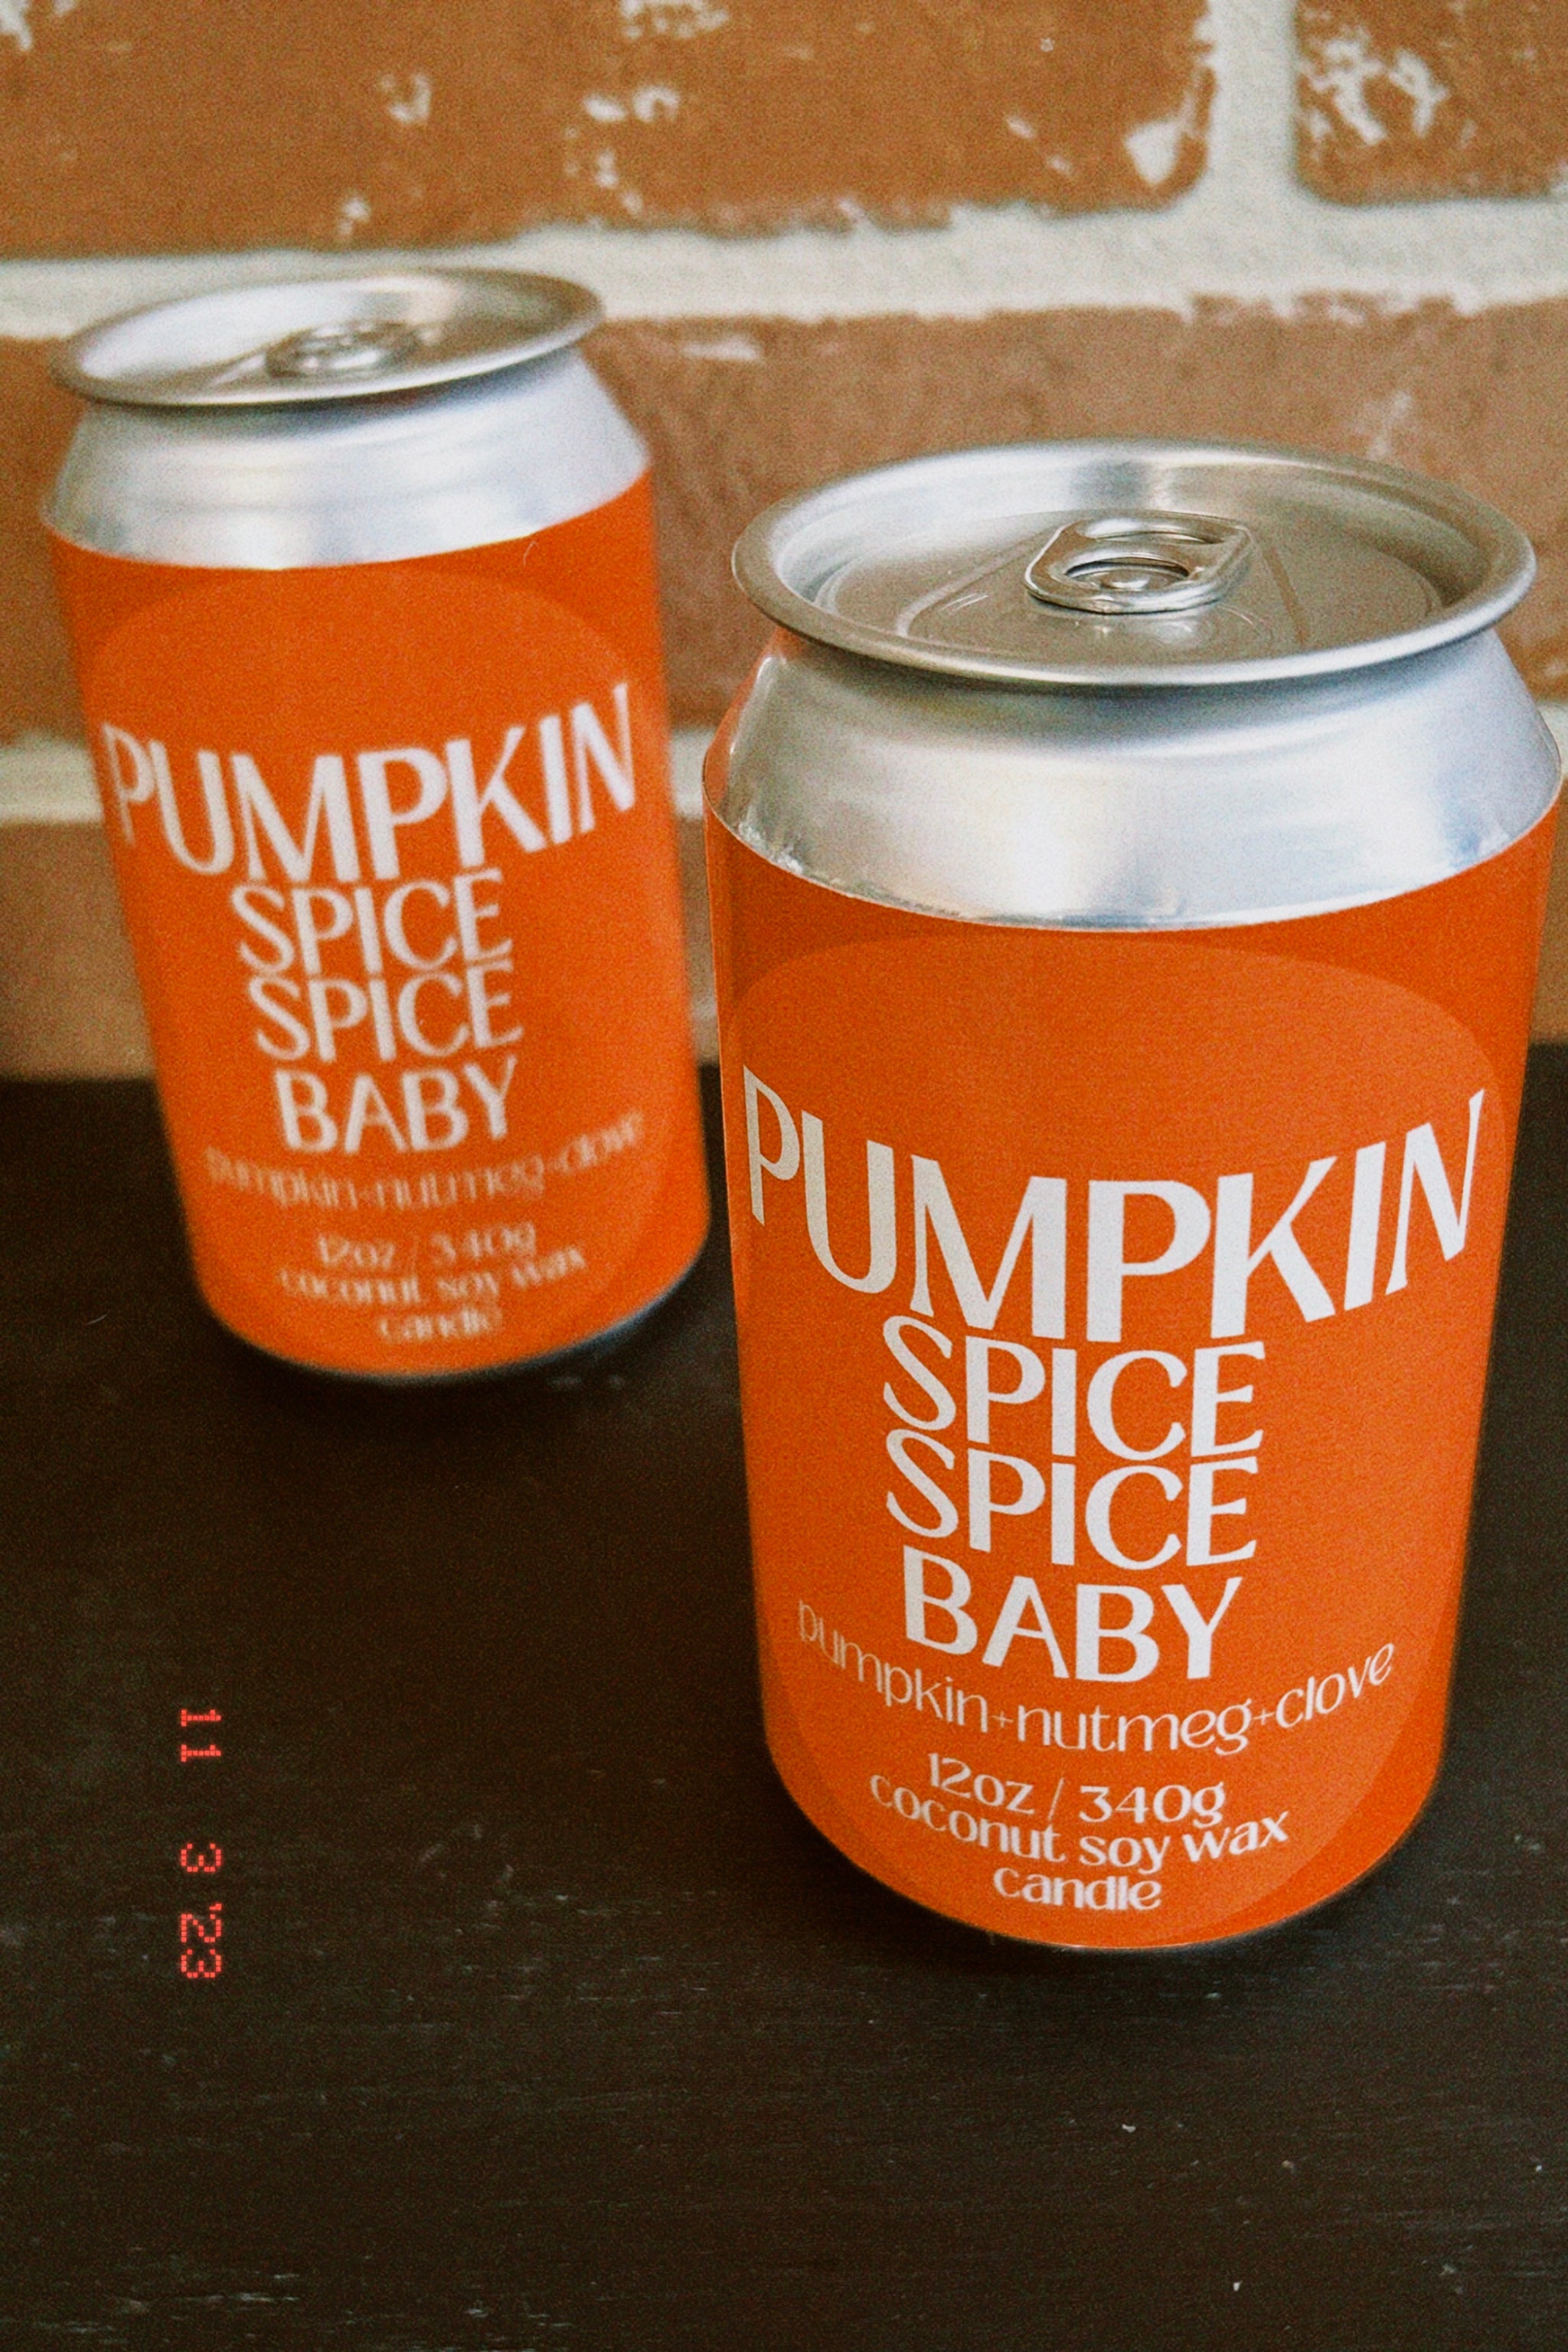 Pumpkin Spice Spice Baby CANdle